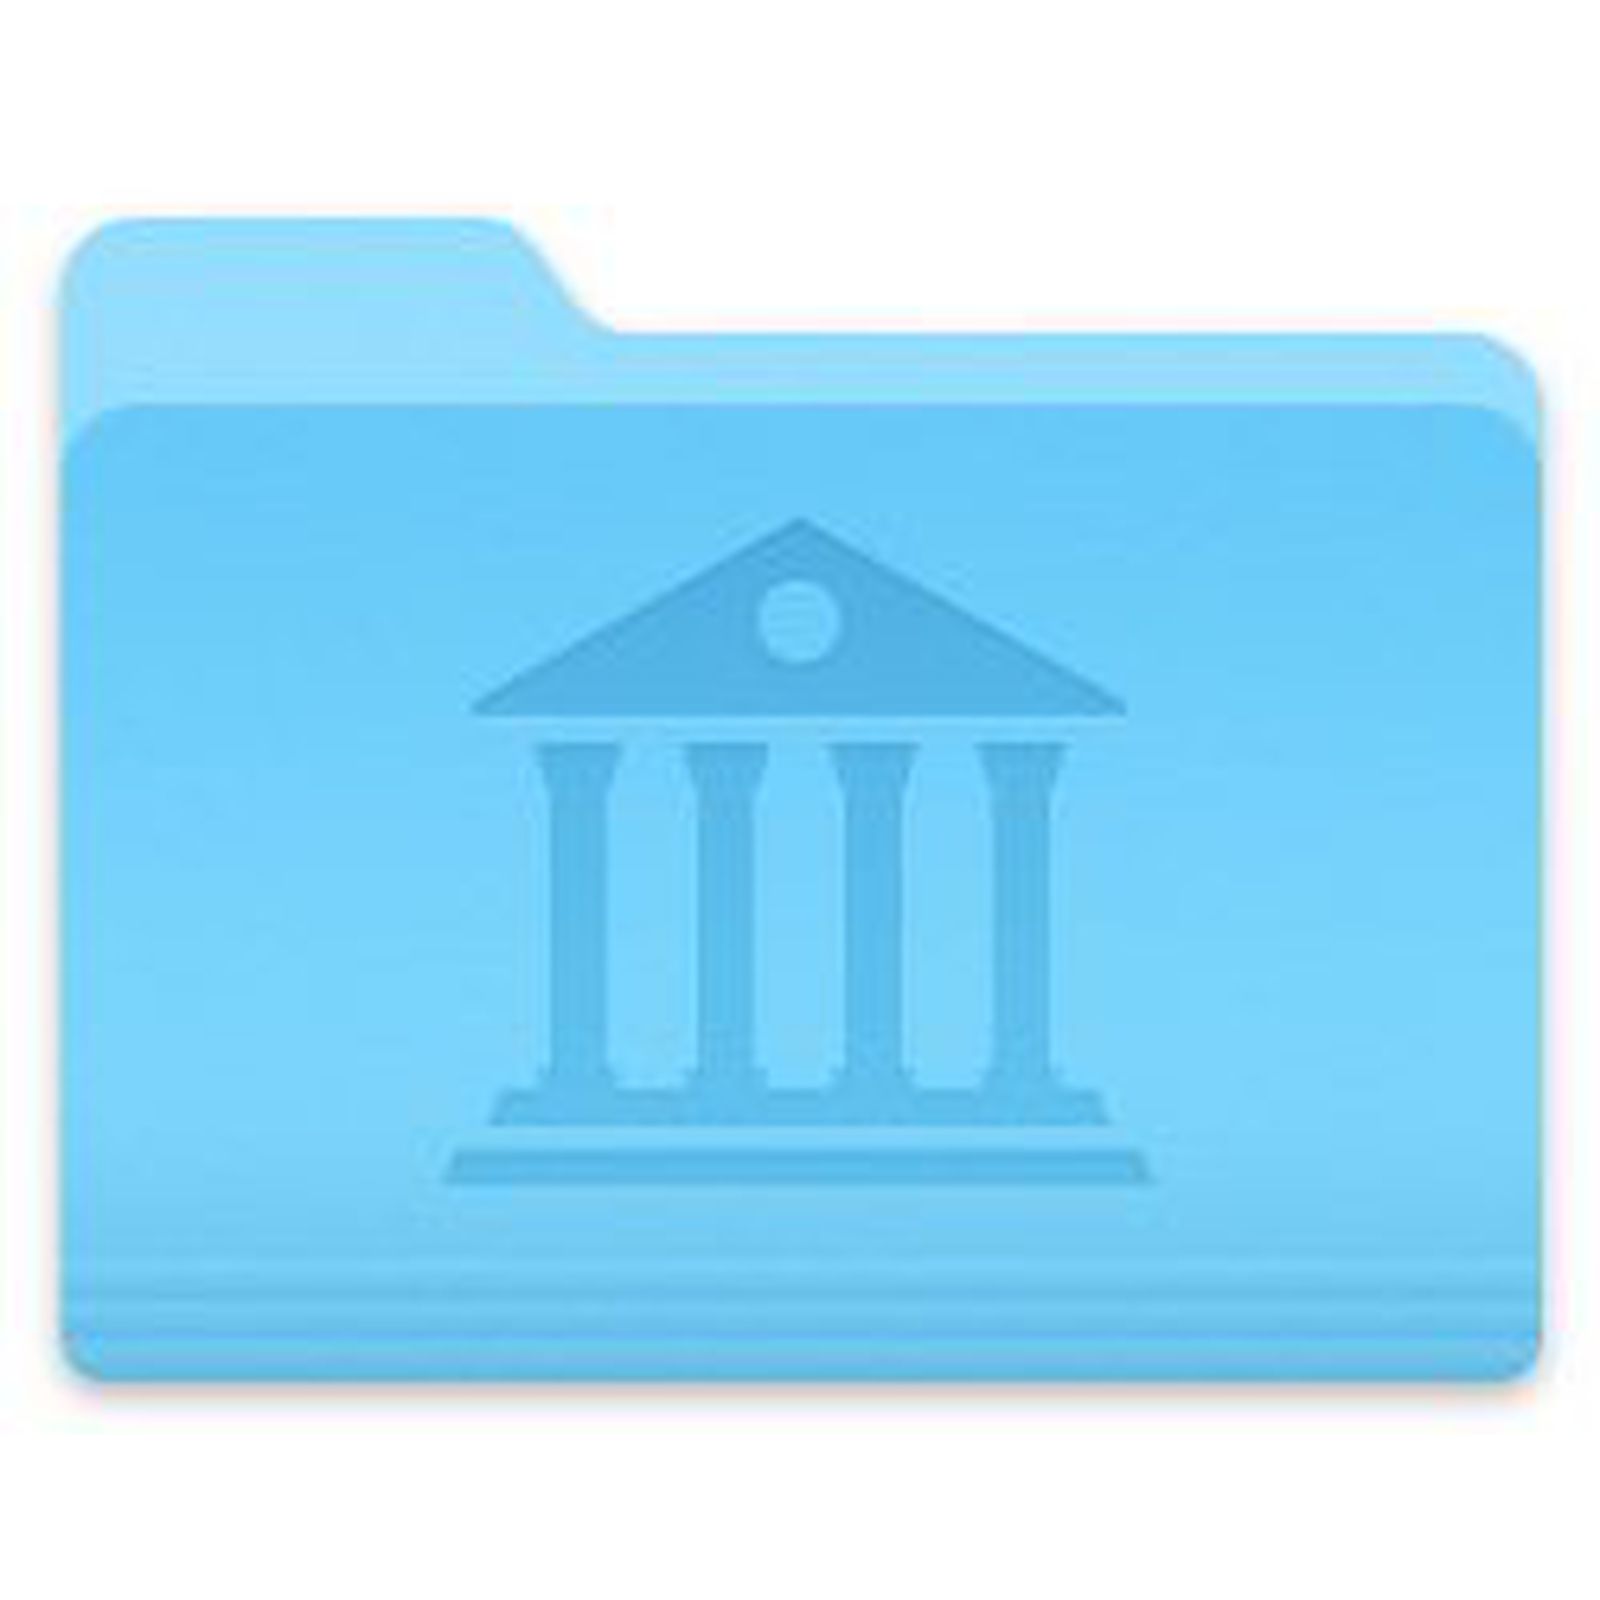 will finder mac open library files